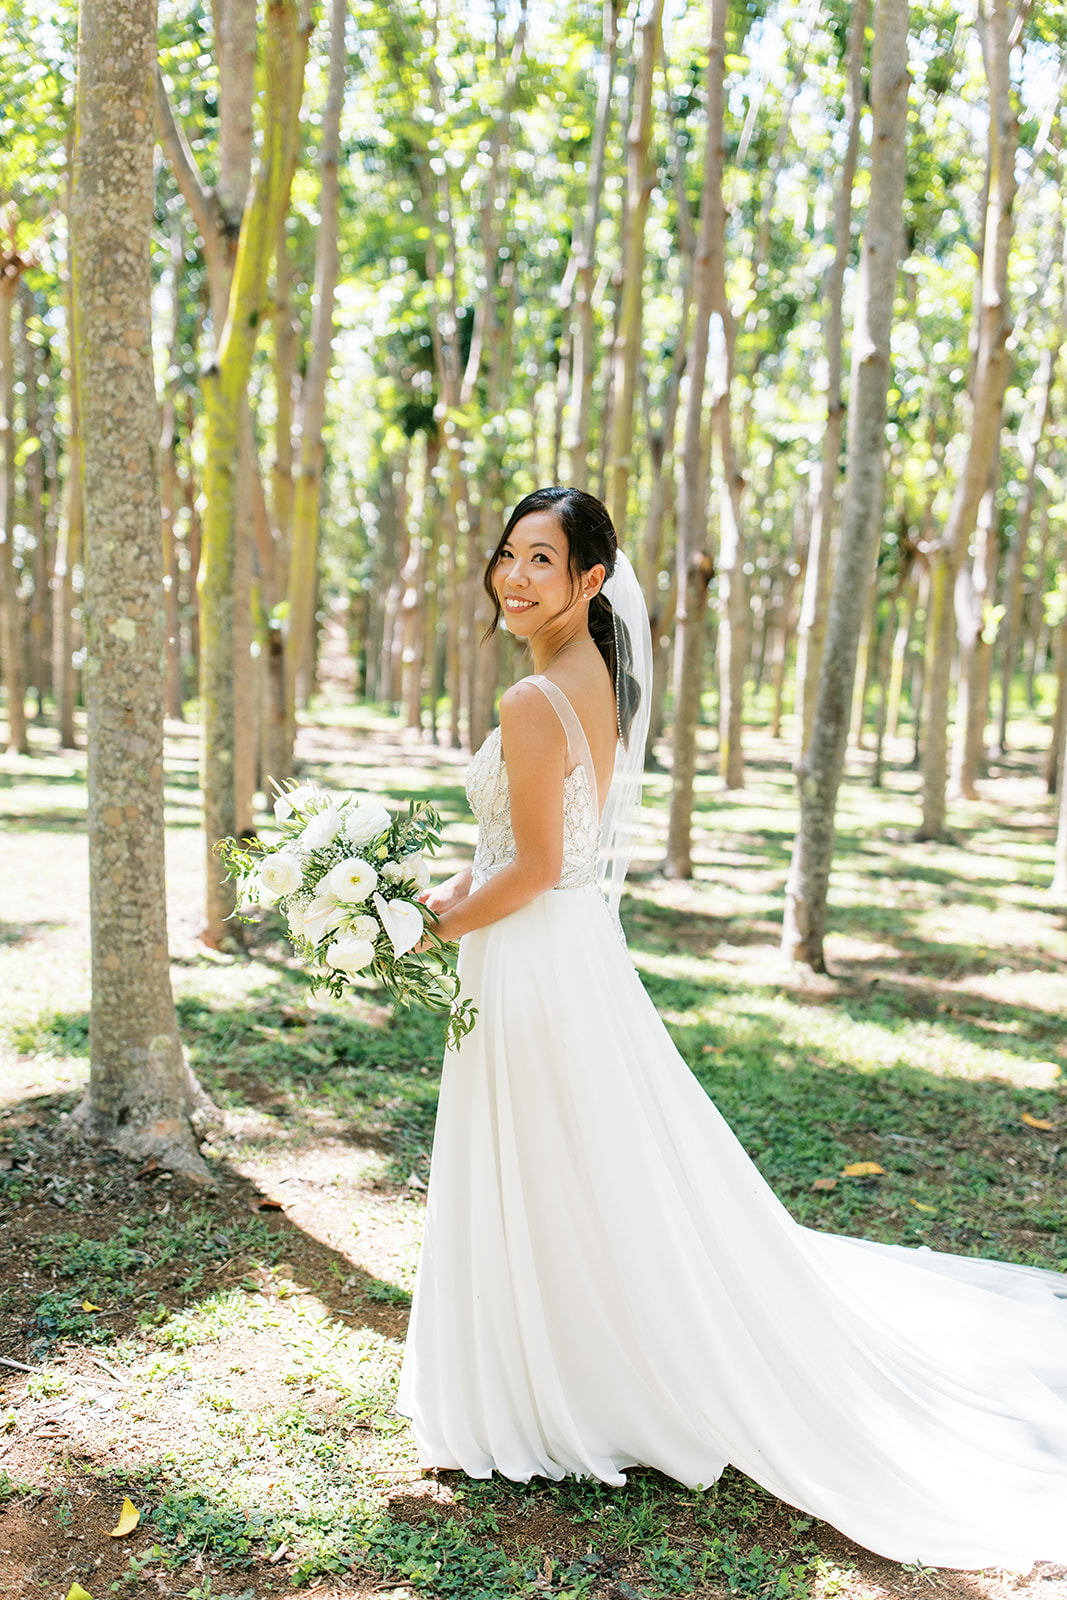 Bride holding a bouquet and smiling in a sunlit forest captured by Oahu Wedding Photographer
 